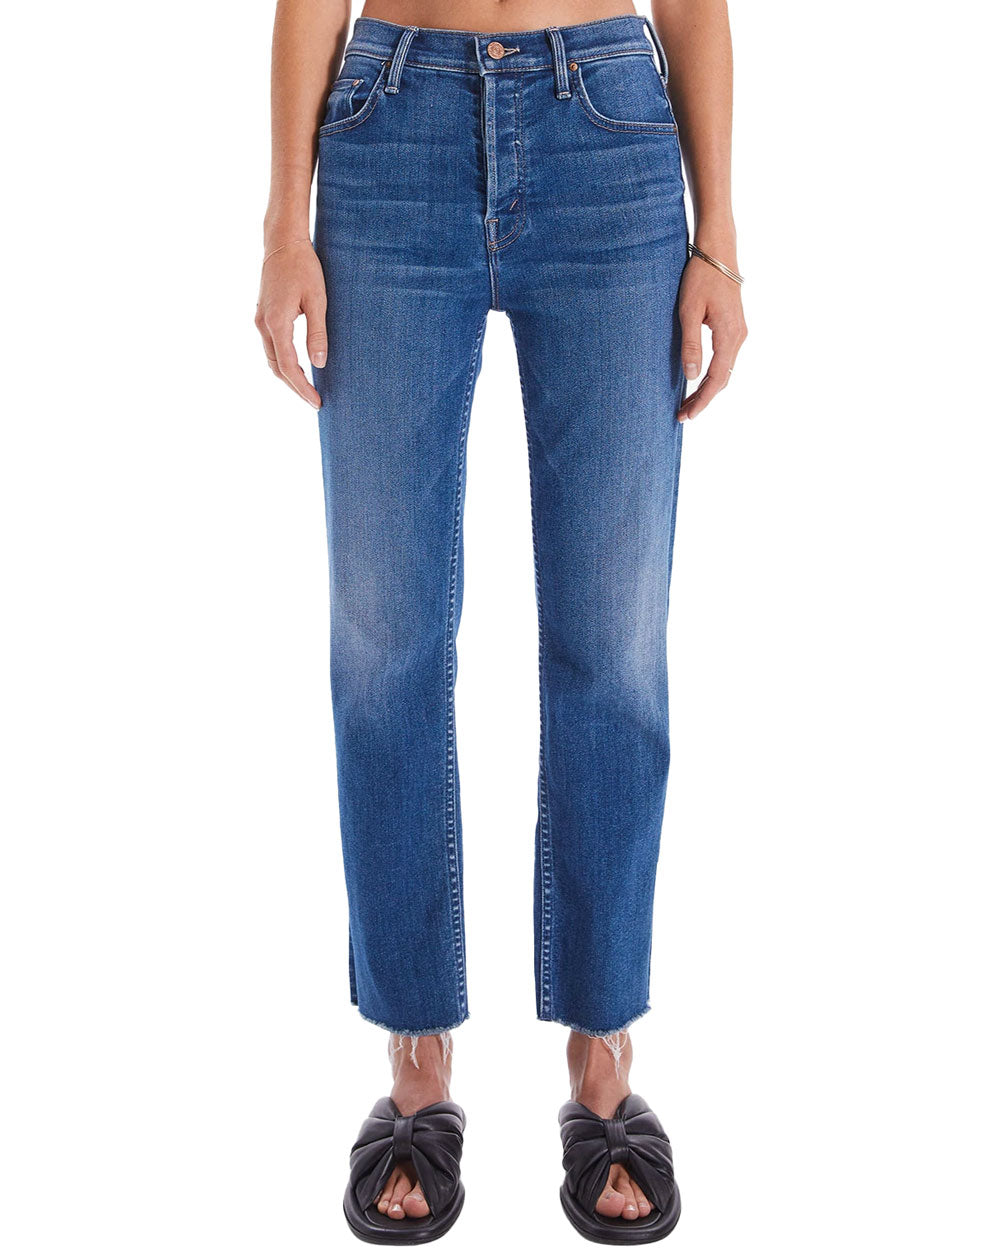 The Tomcat Ankle Fray Jean in Lets Just Be Friends